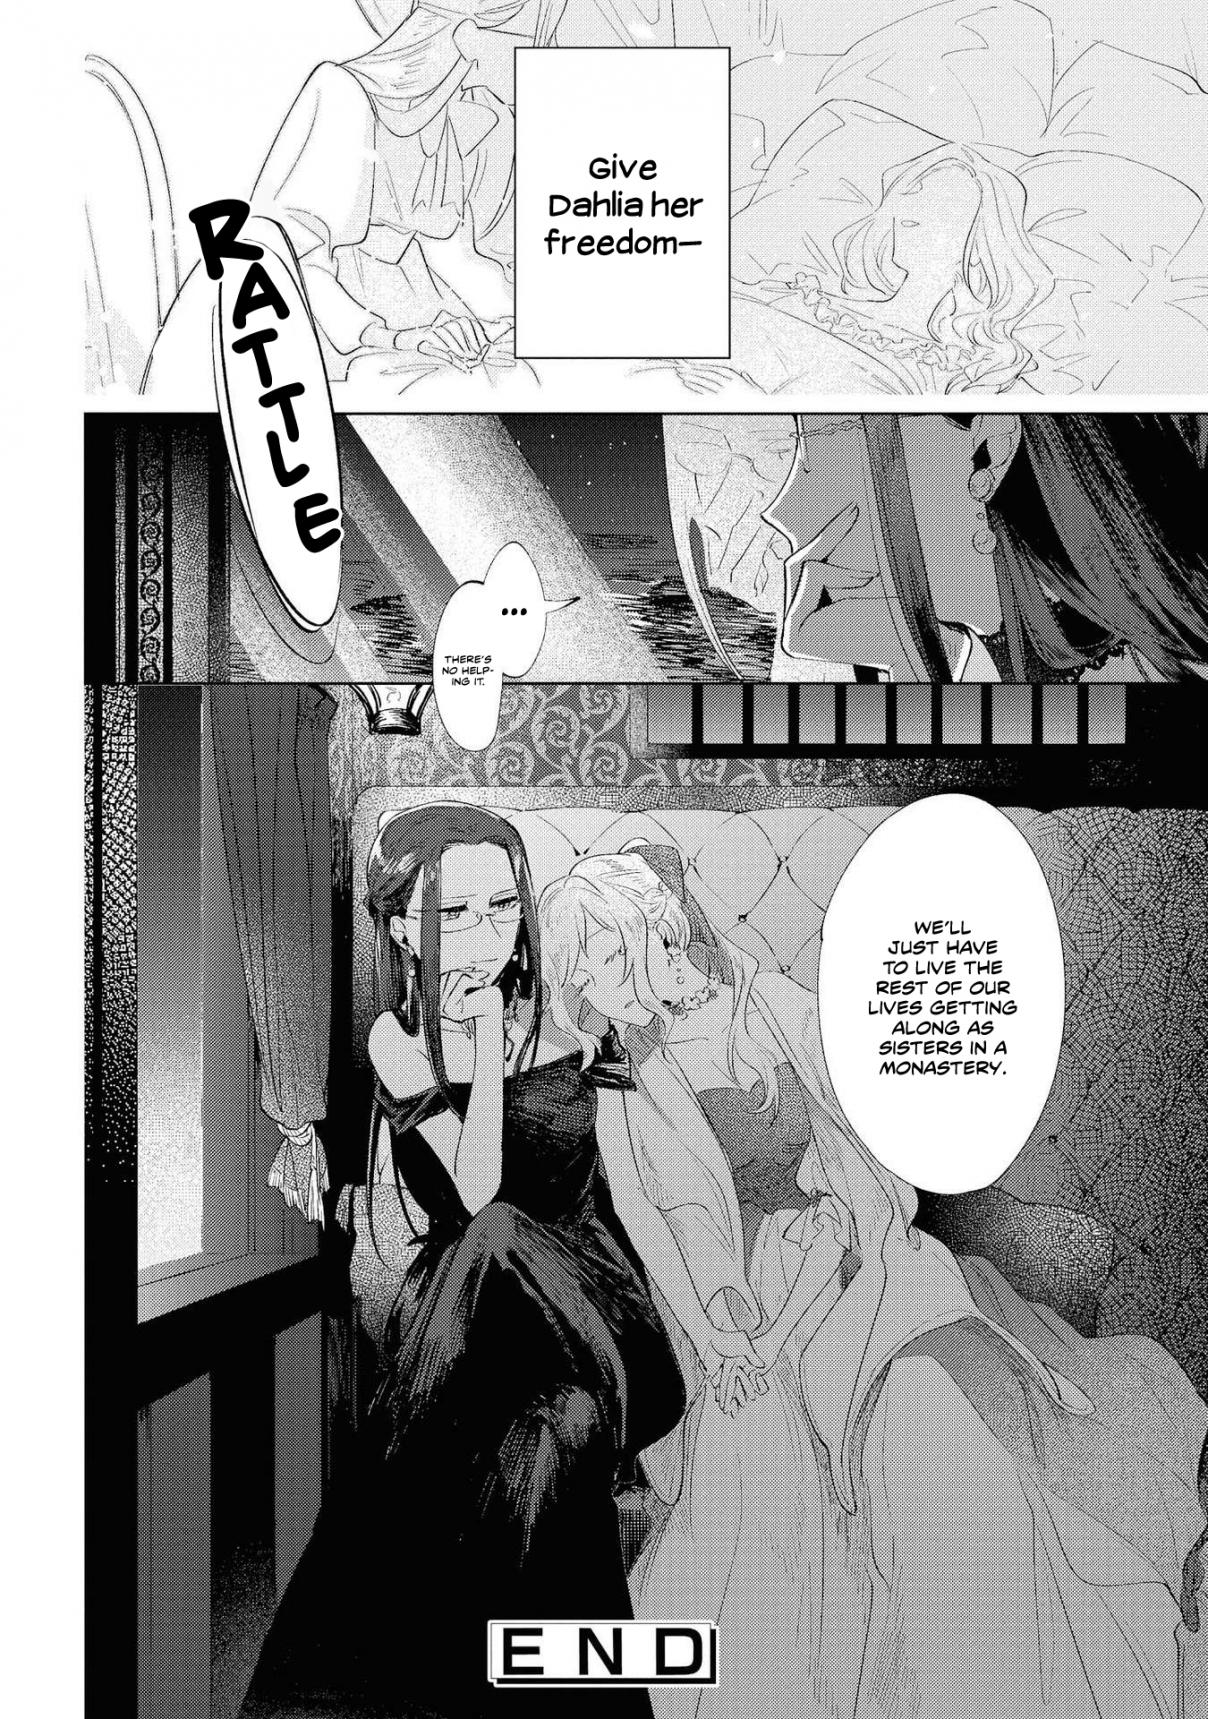 Though I May Be a Villainess, I'll Show You I Can Obtain Happiness! Vol. 1 Ch. 2 The Tale of the Noble Girl who will go to a Monastery after her Engagement Annulment